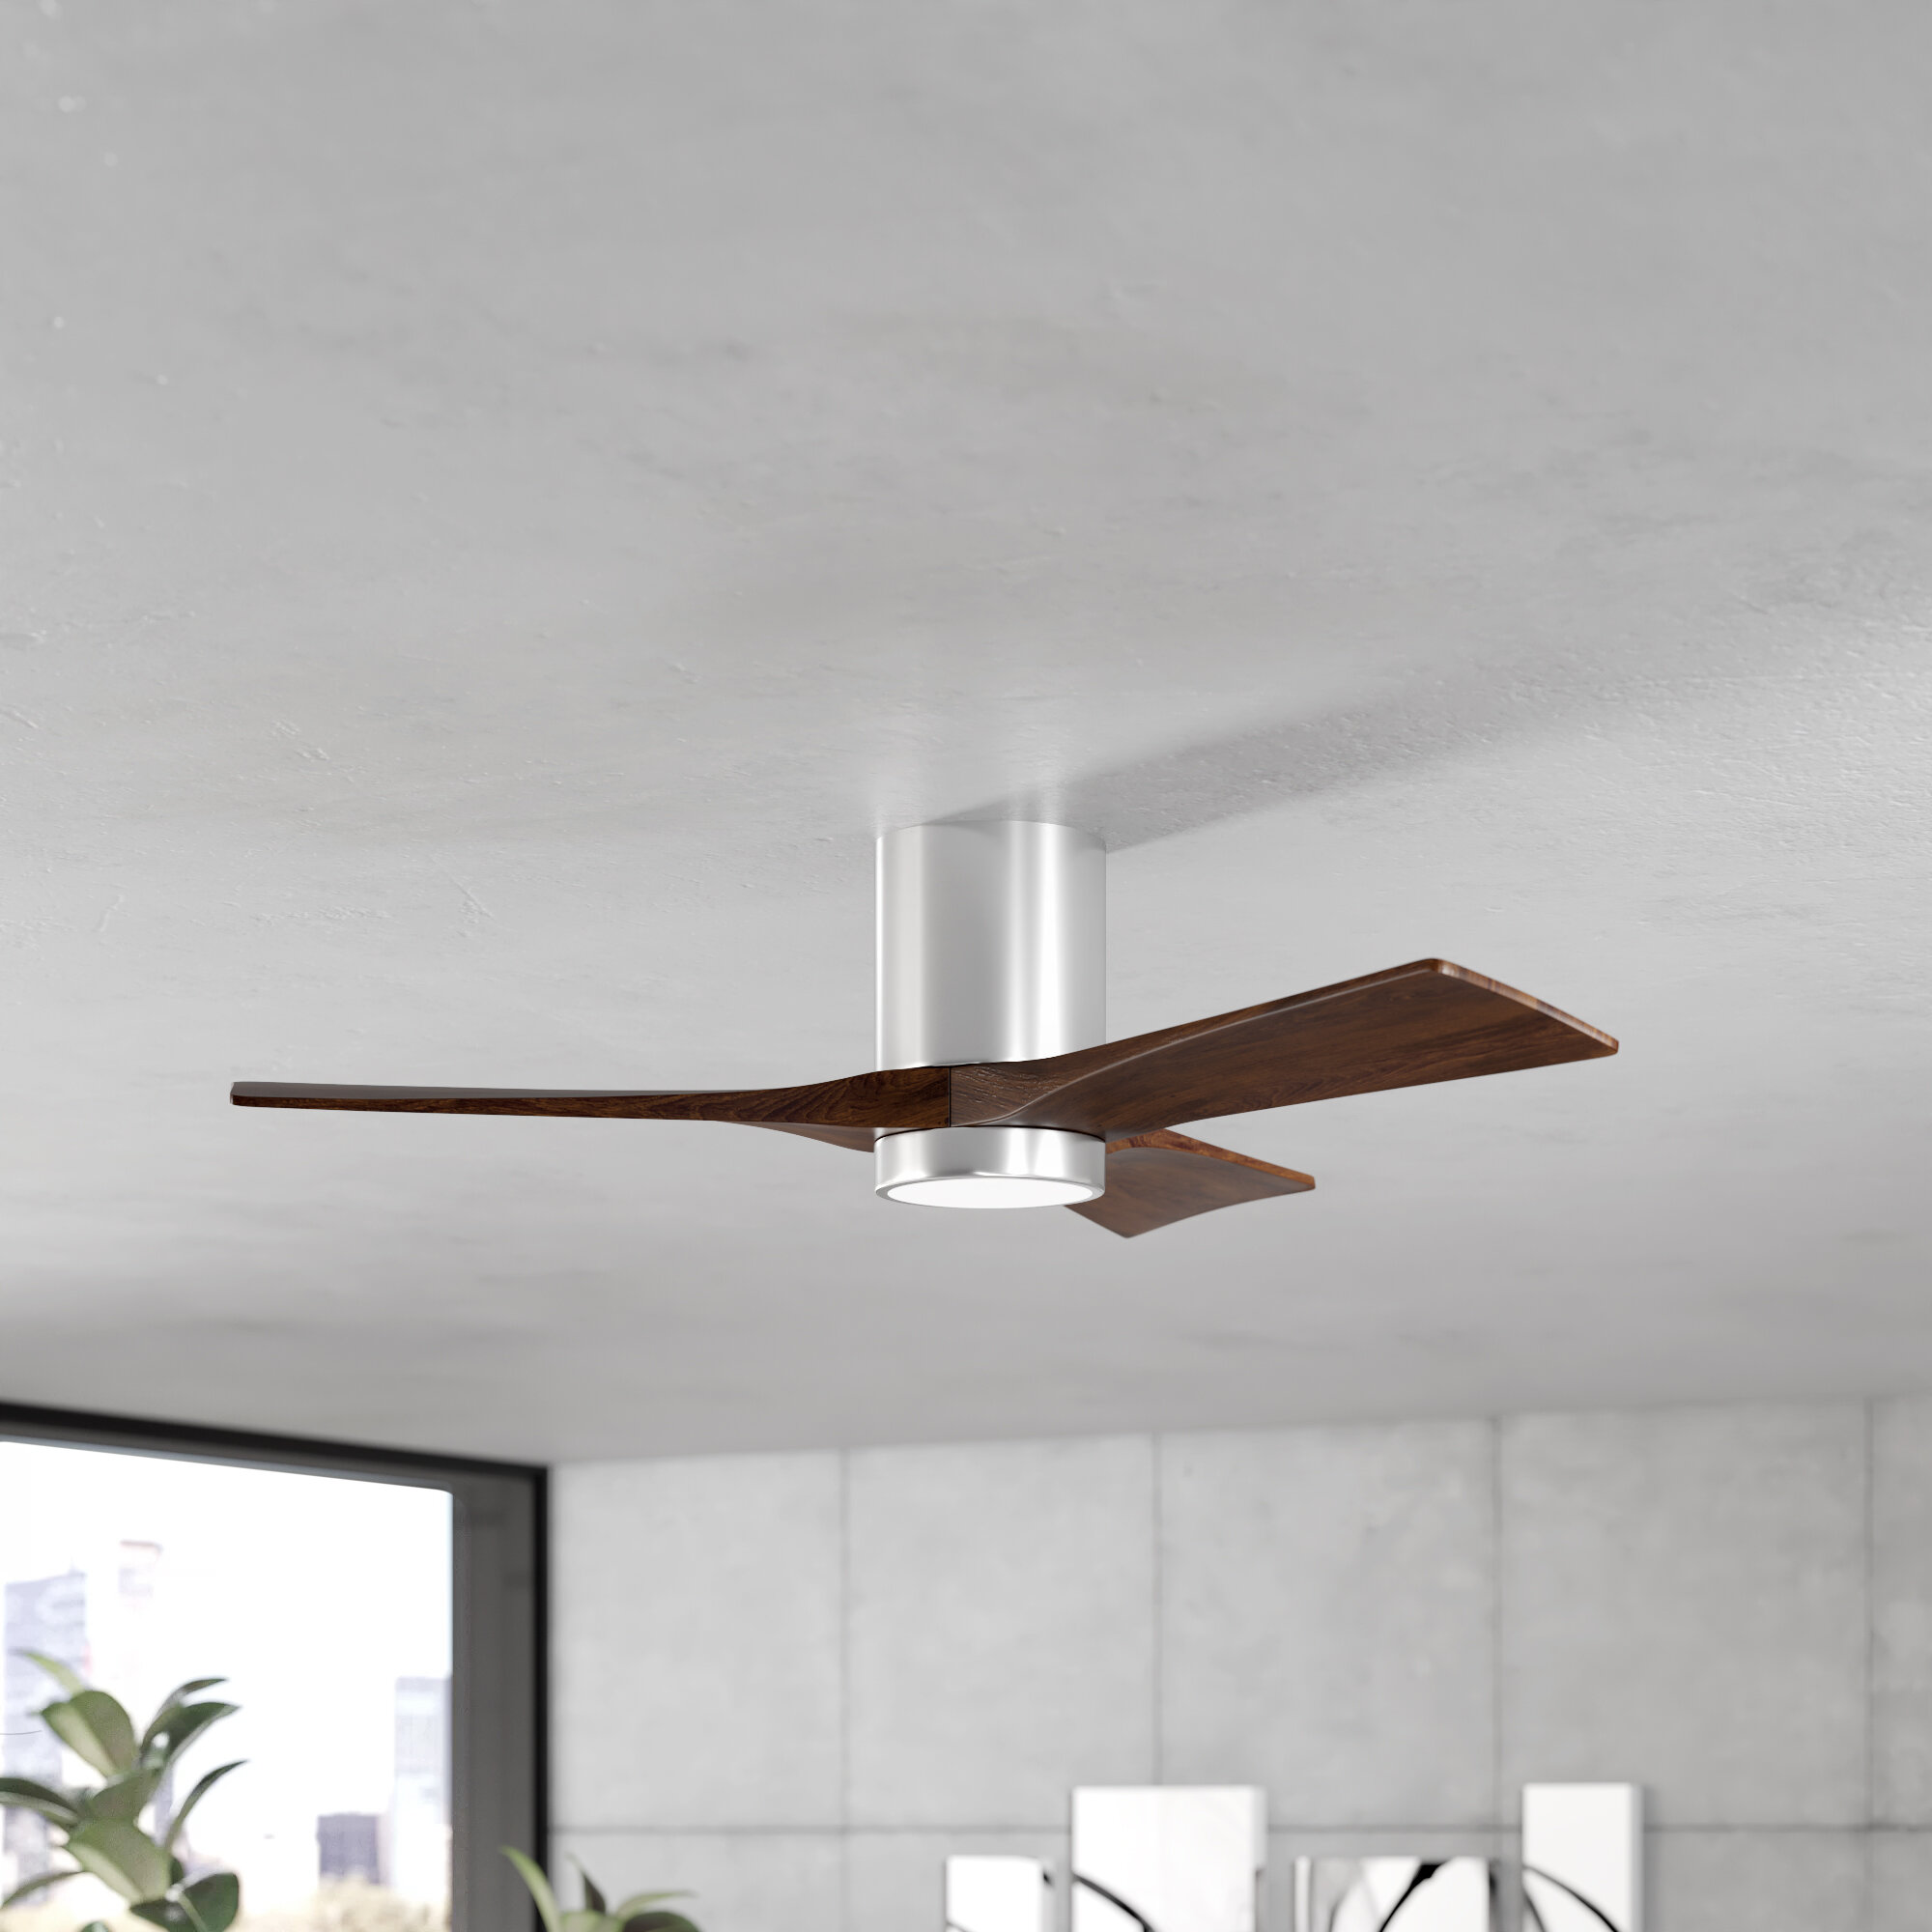 Wade Logan 42 Trost 3 Blade Hugger Ceiling Fan With Wall Remote